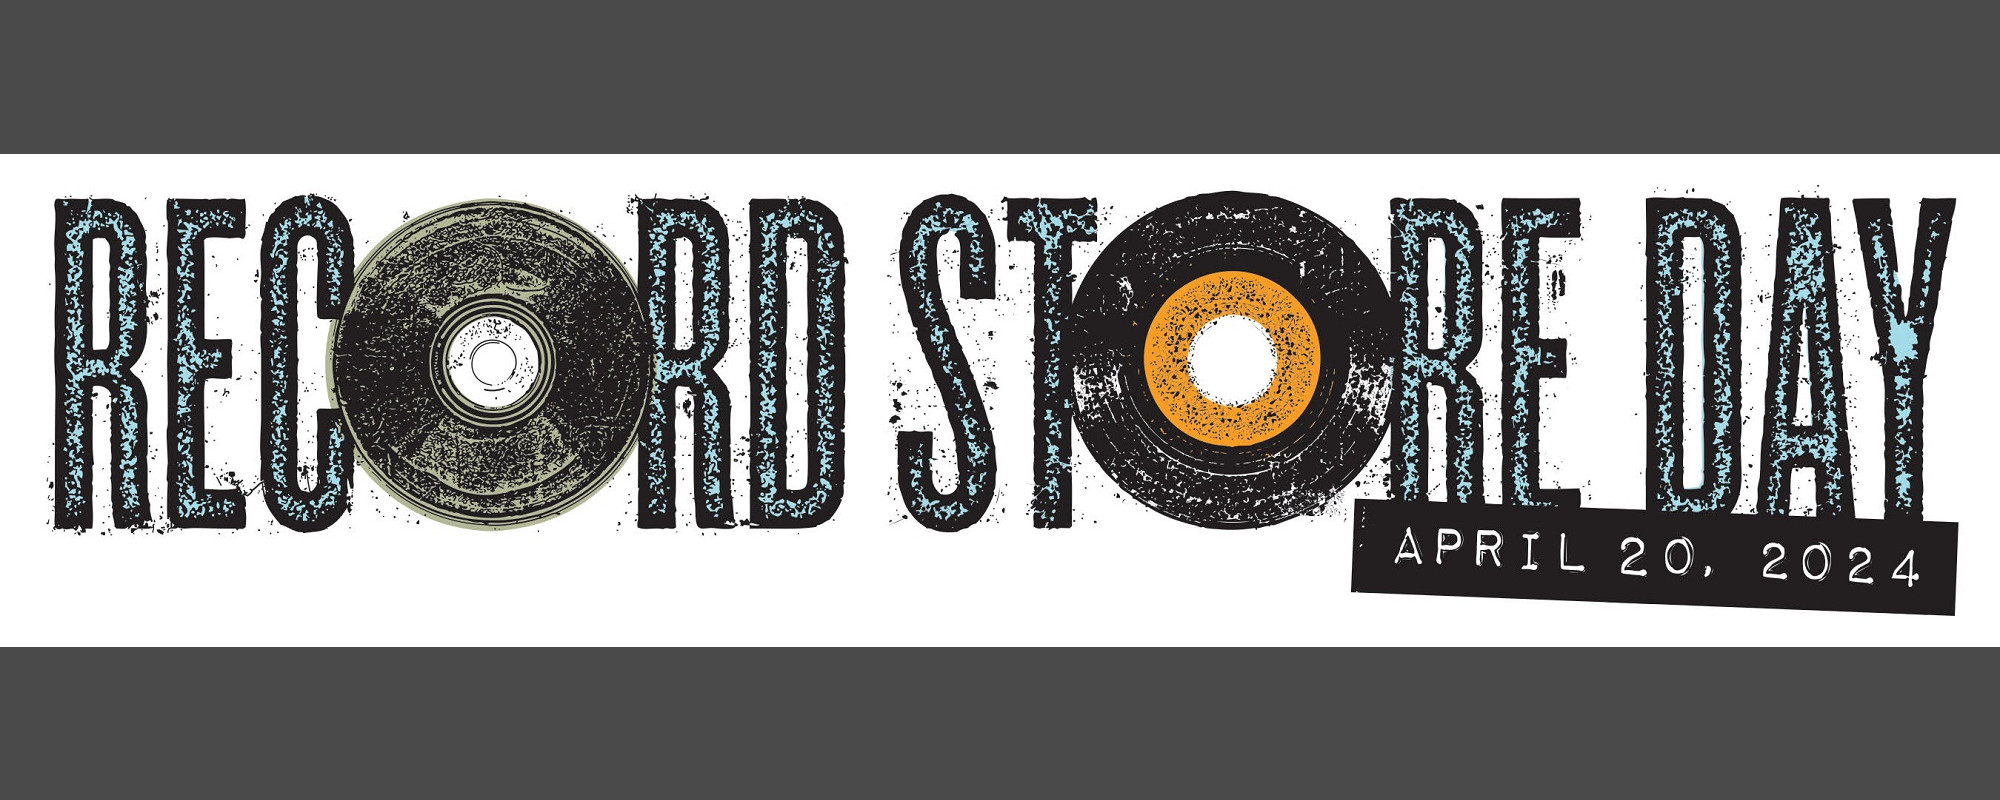 2024 Record Store Day April 20: Vinyl Releases from The Beatles, Willie Nelson, Lainey Wilson, & More